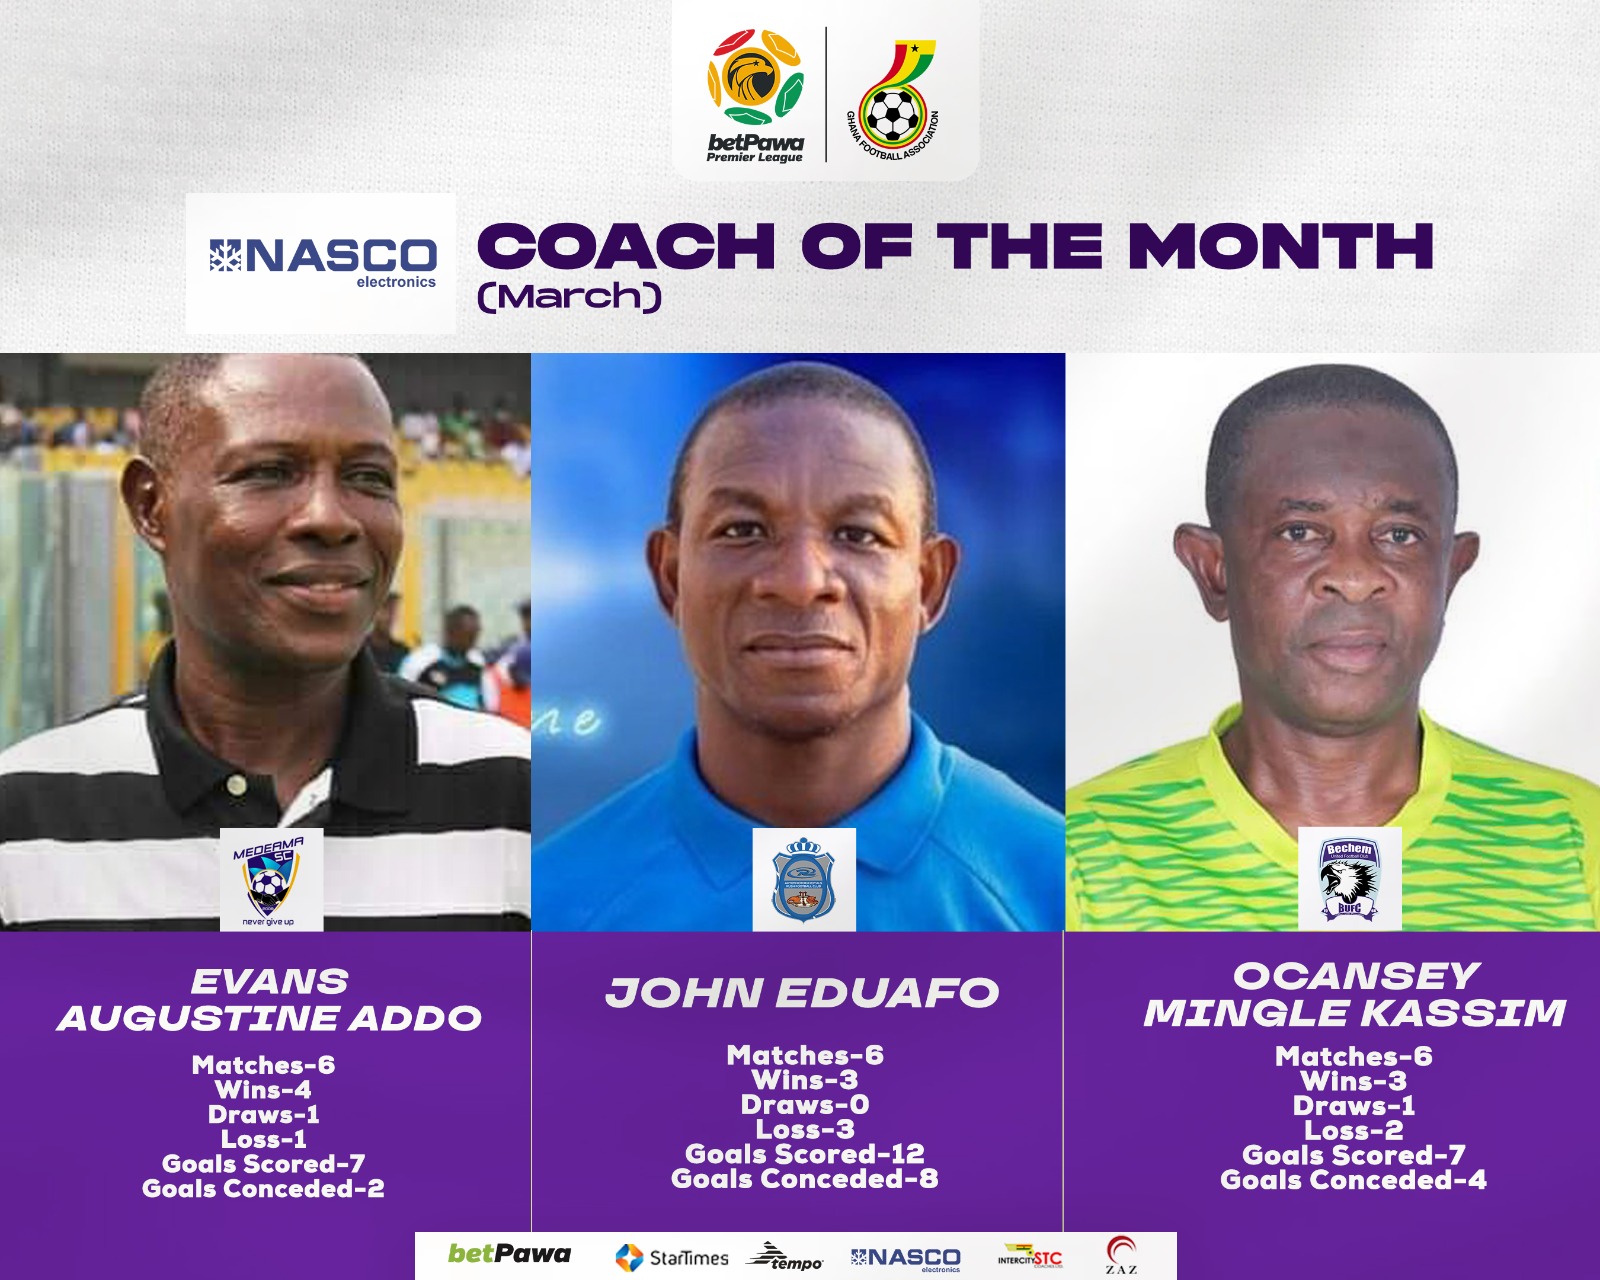 NASCO Coach of the Month nominees for March revealed